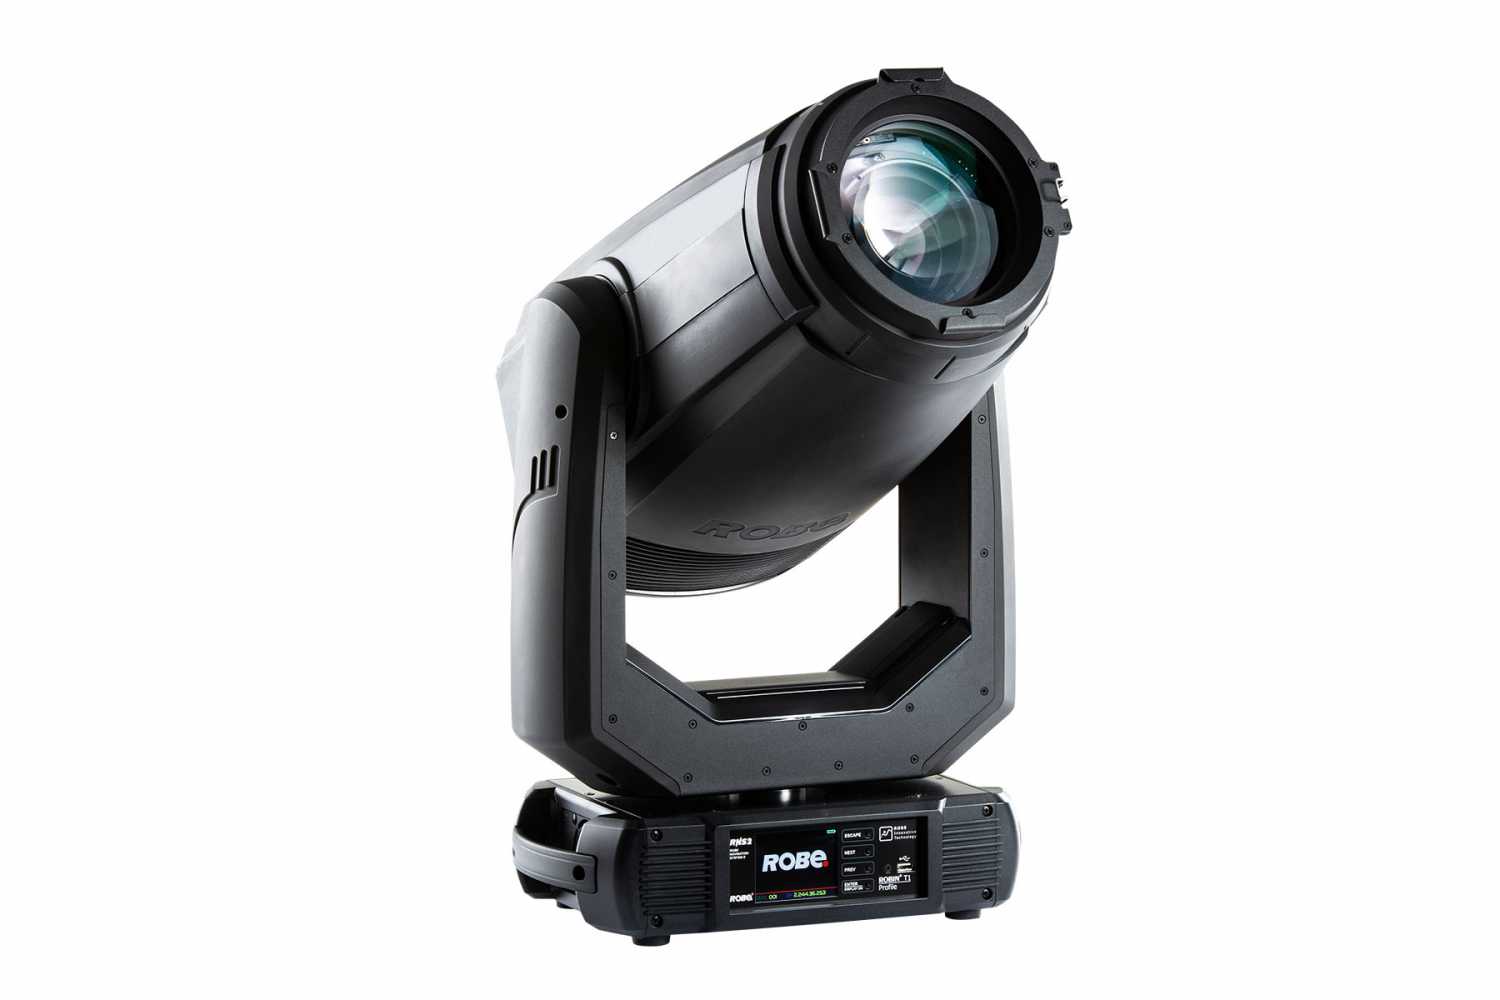 The T1 Profile is designed for theatre, television and touring